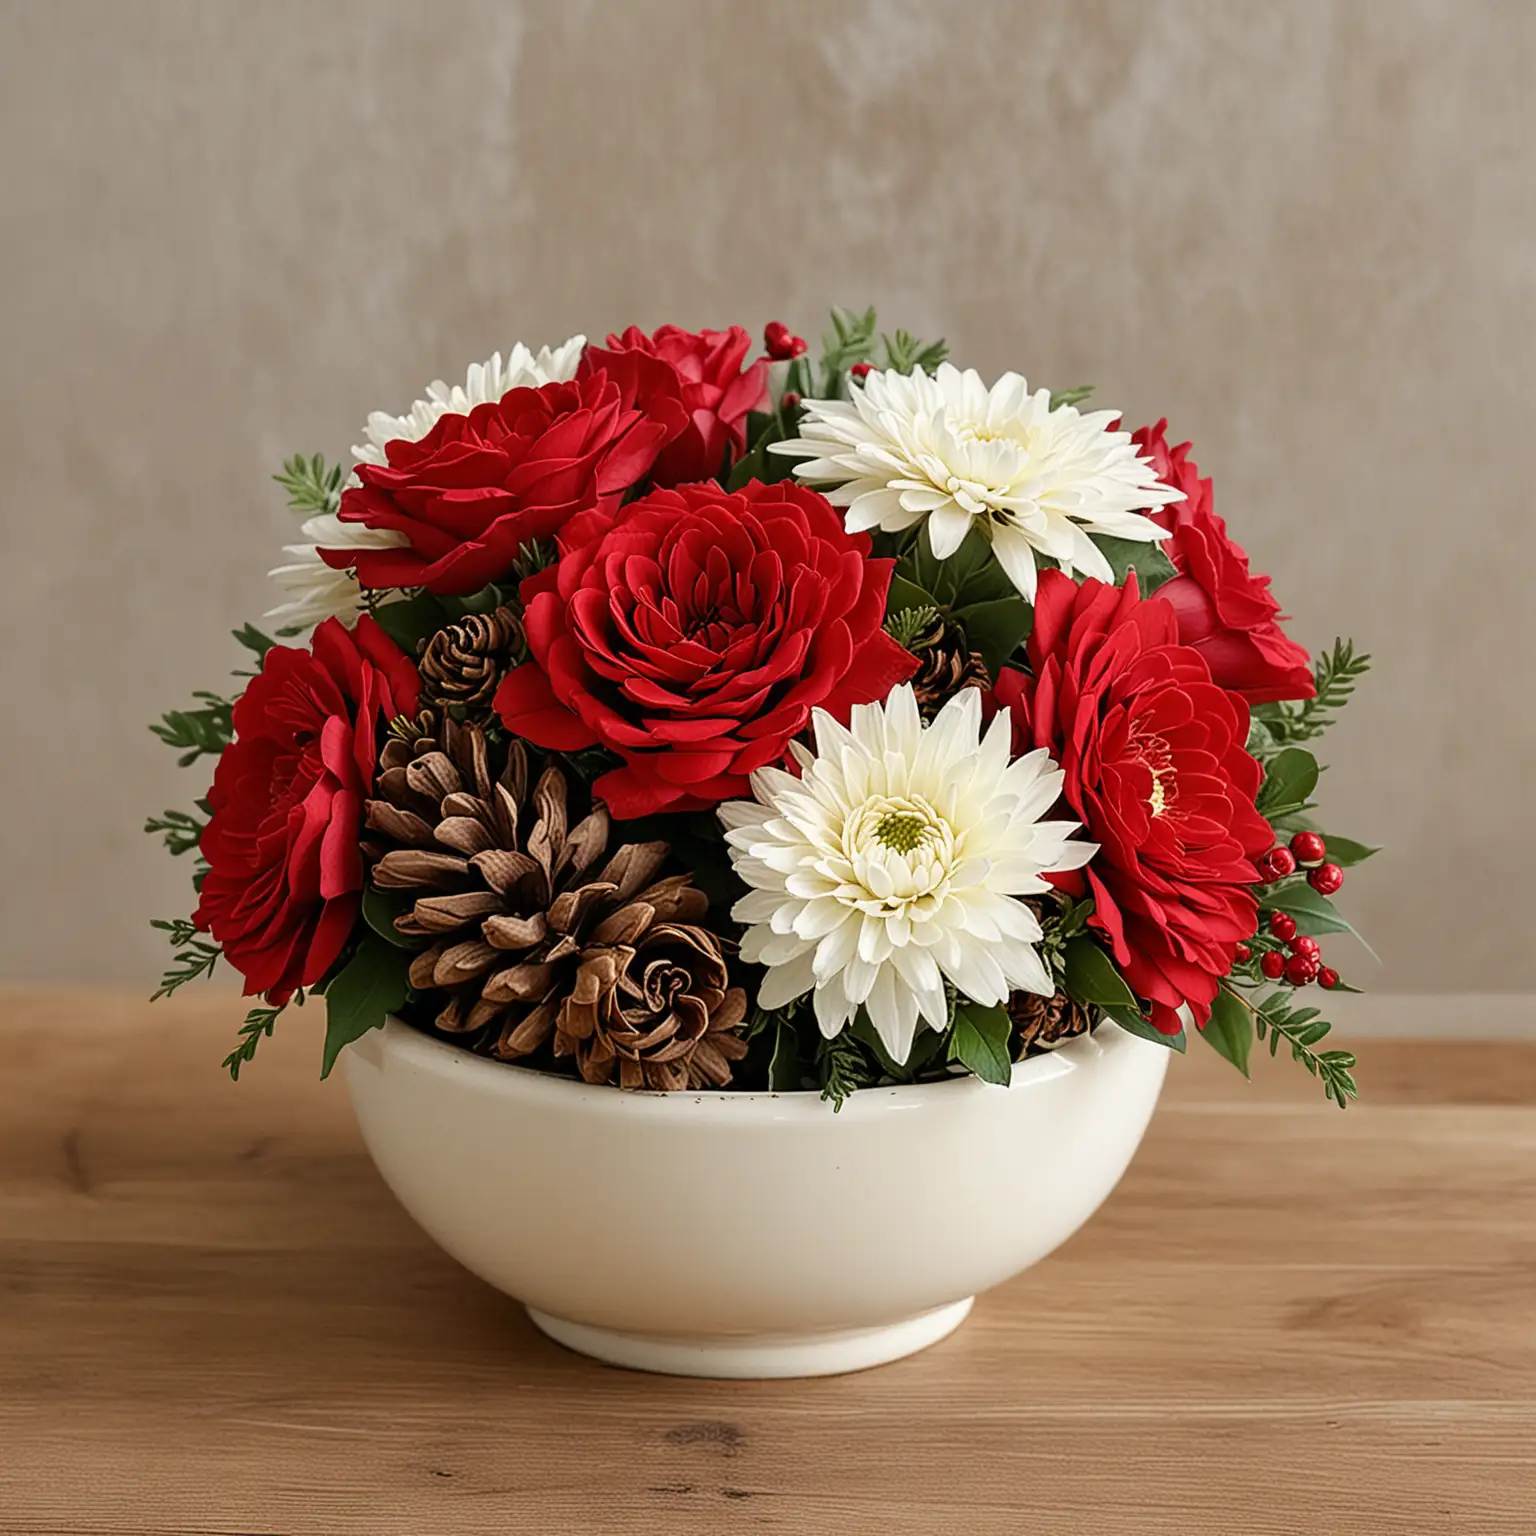 Fall-Centerpiece-Small-Red-Rose-and-Ivory-Mum-Arrangement-with-Pinecone-Accents